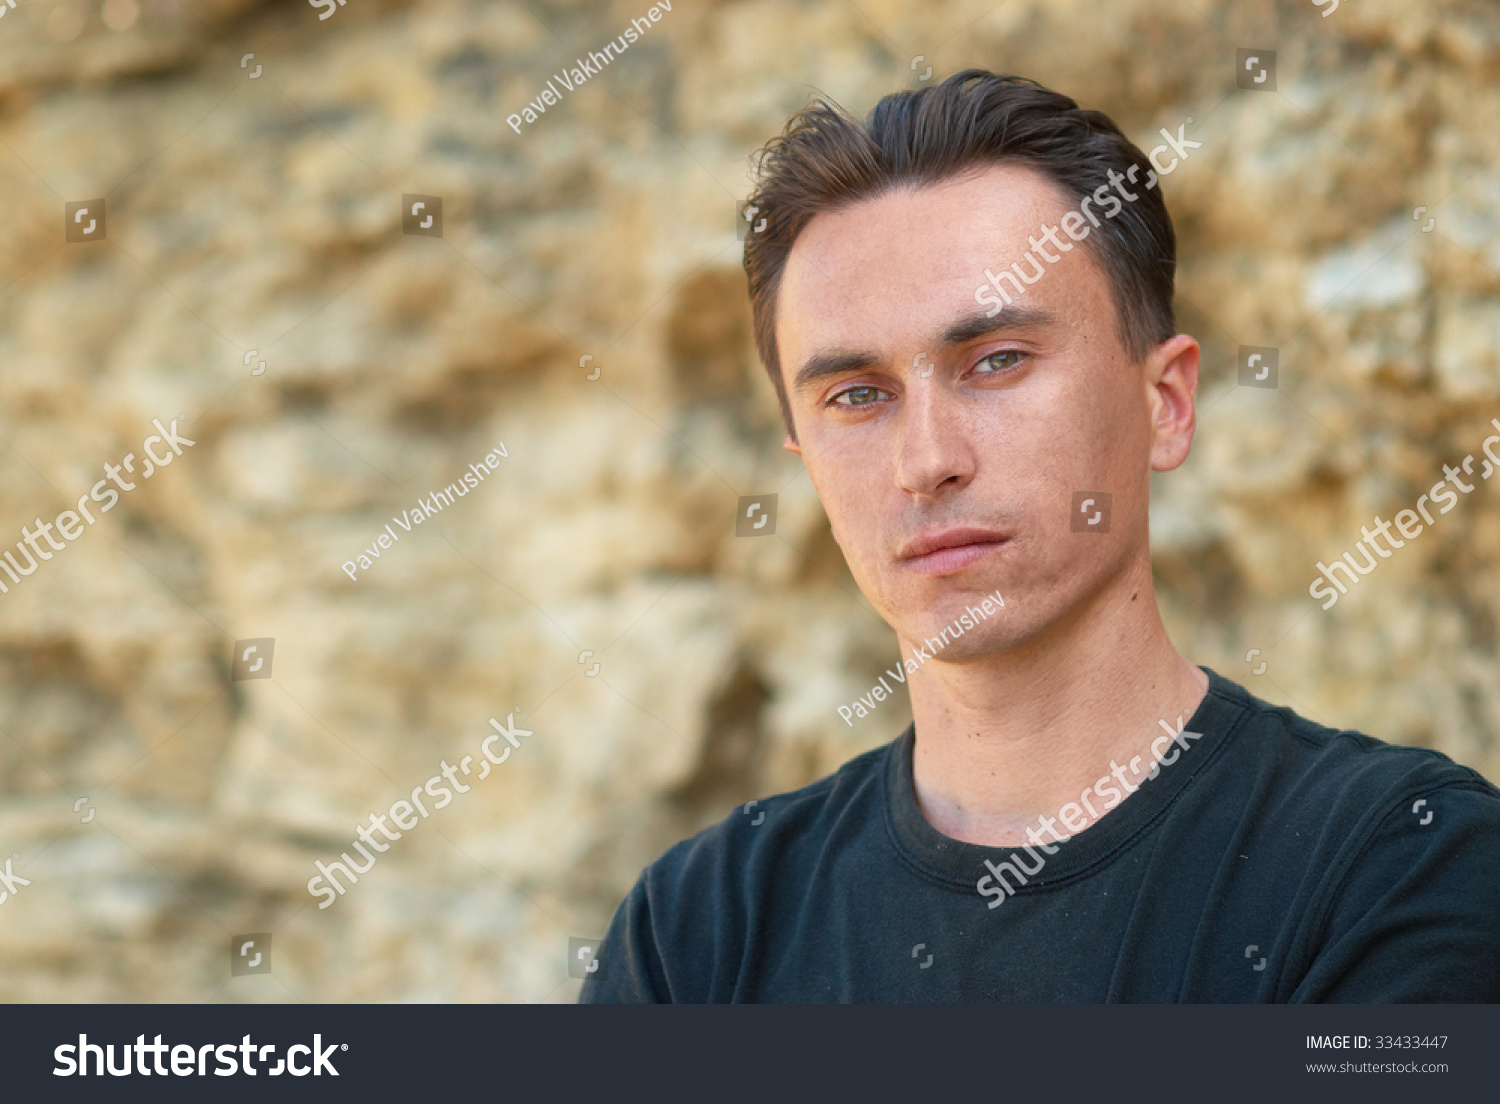 Portrait of young man with soft background #33433447